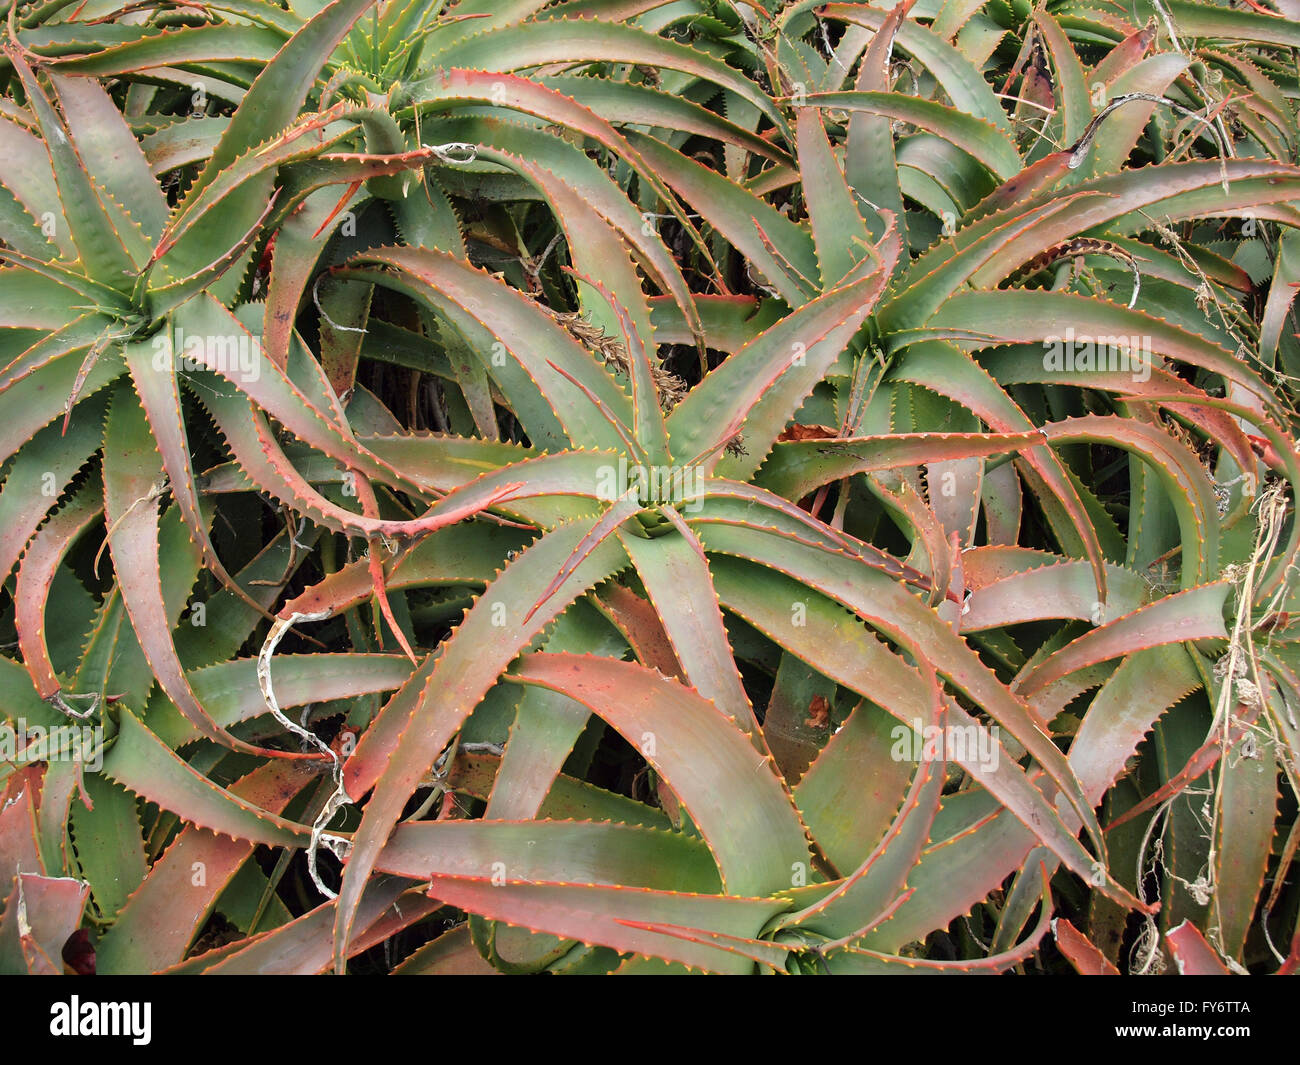 Aloe plants grown wildy and tight together. Stock Photo